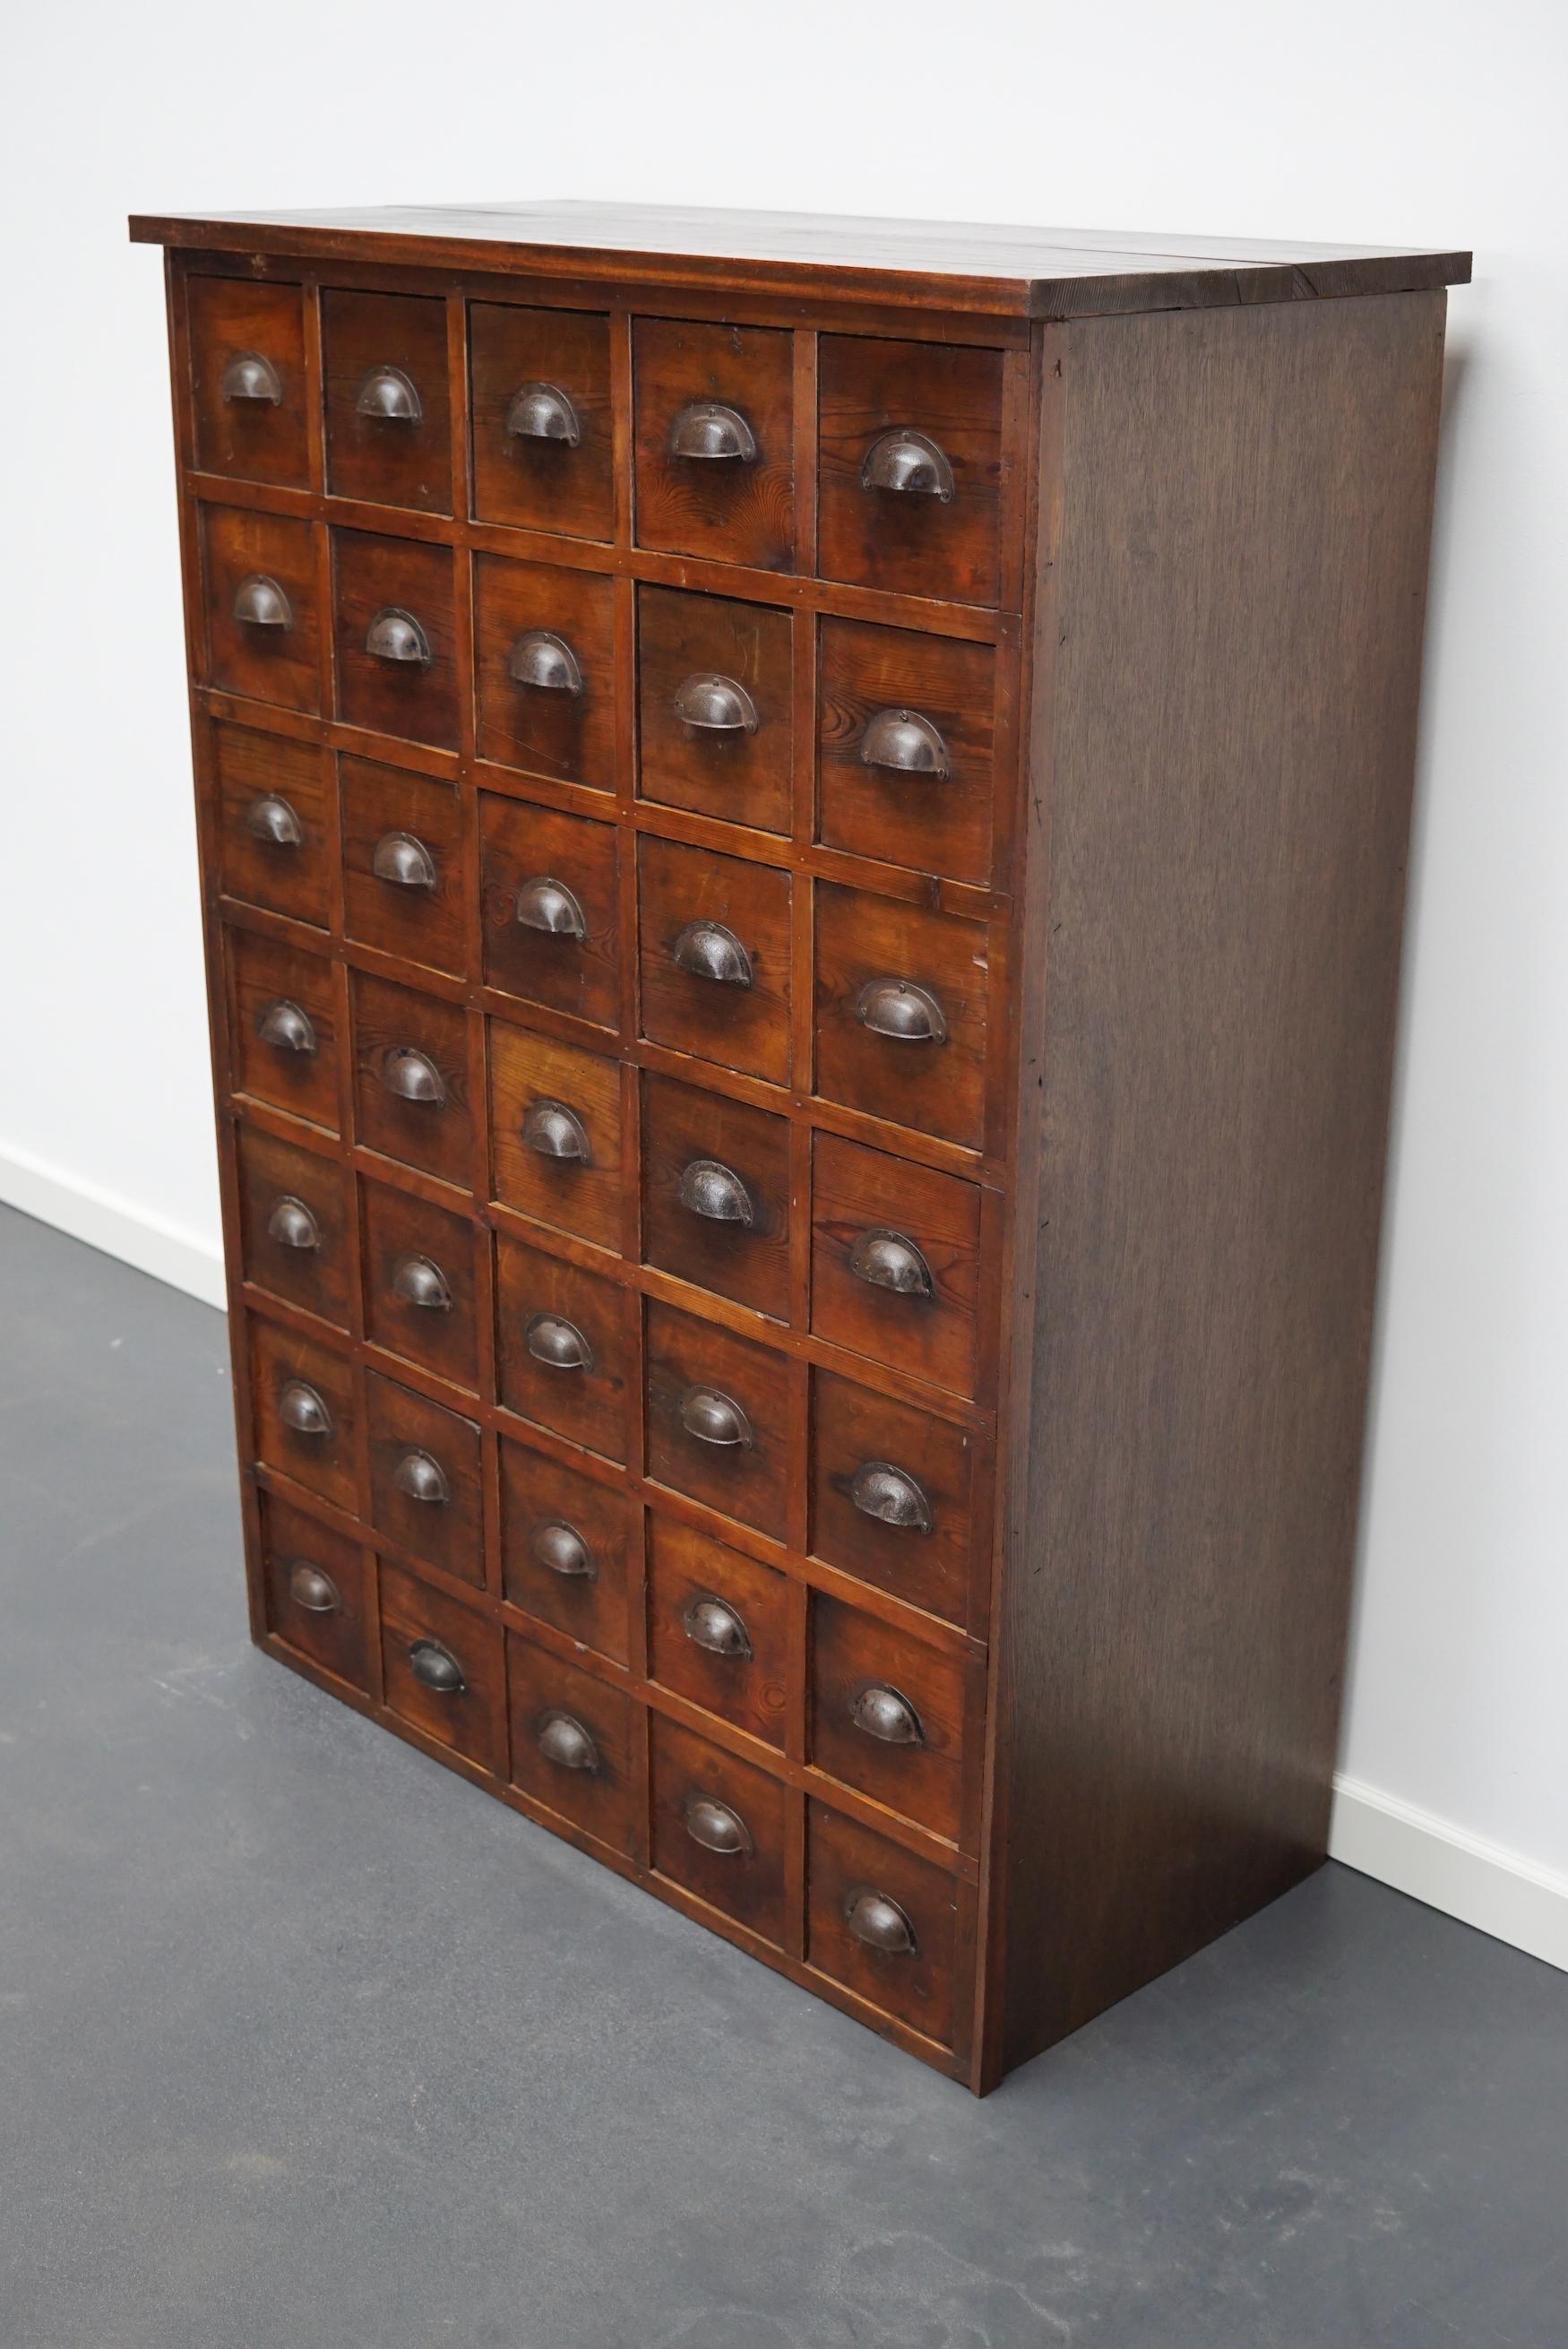 This workshop cabinet was made from pine in France circa mid-20th century. It features 35 drawers with metal cup handles. The interior dimensions of the drawers are: DWH 35.5 x 12.5 x 13.5 cm.